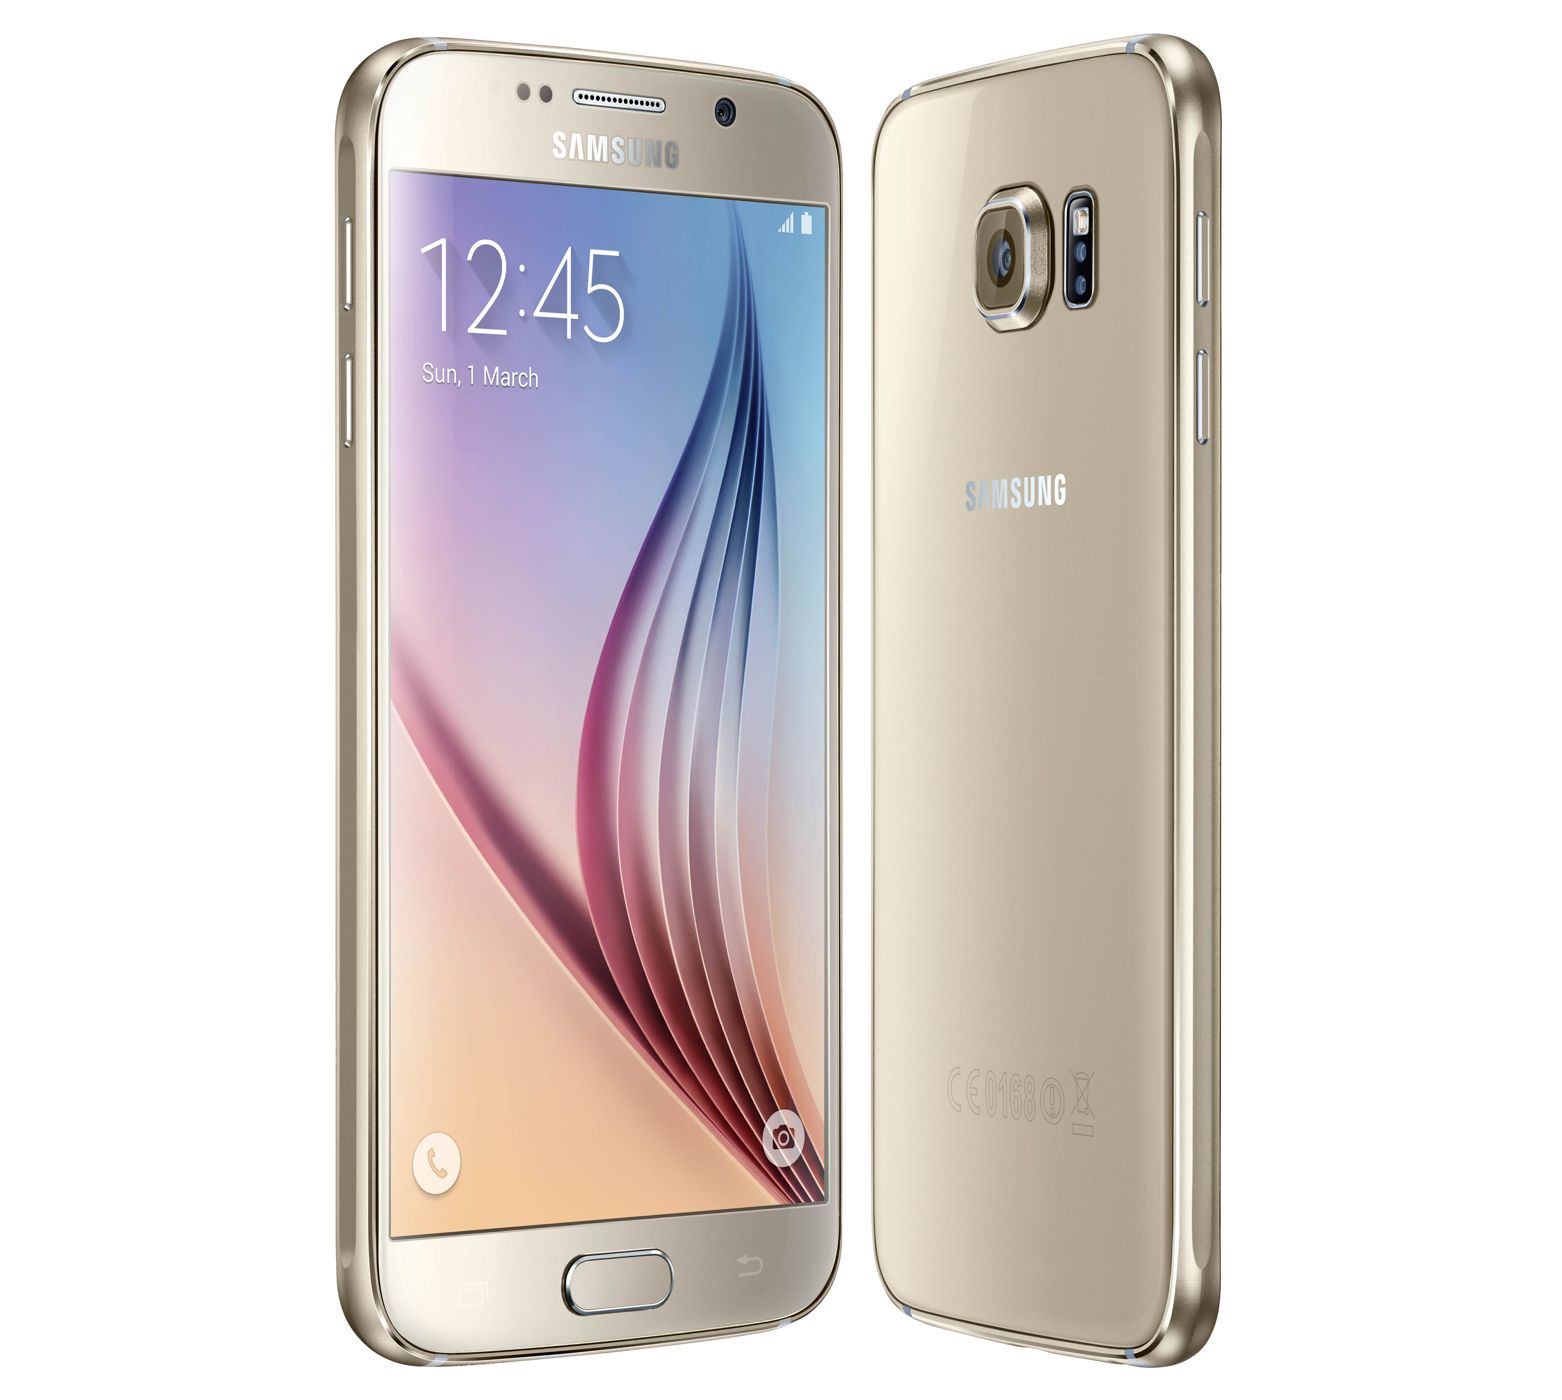 buy Cell Phone Samsung Galaxy S6 SM-G920A 32GB - Platinum Gold - click for details